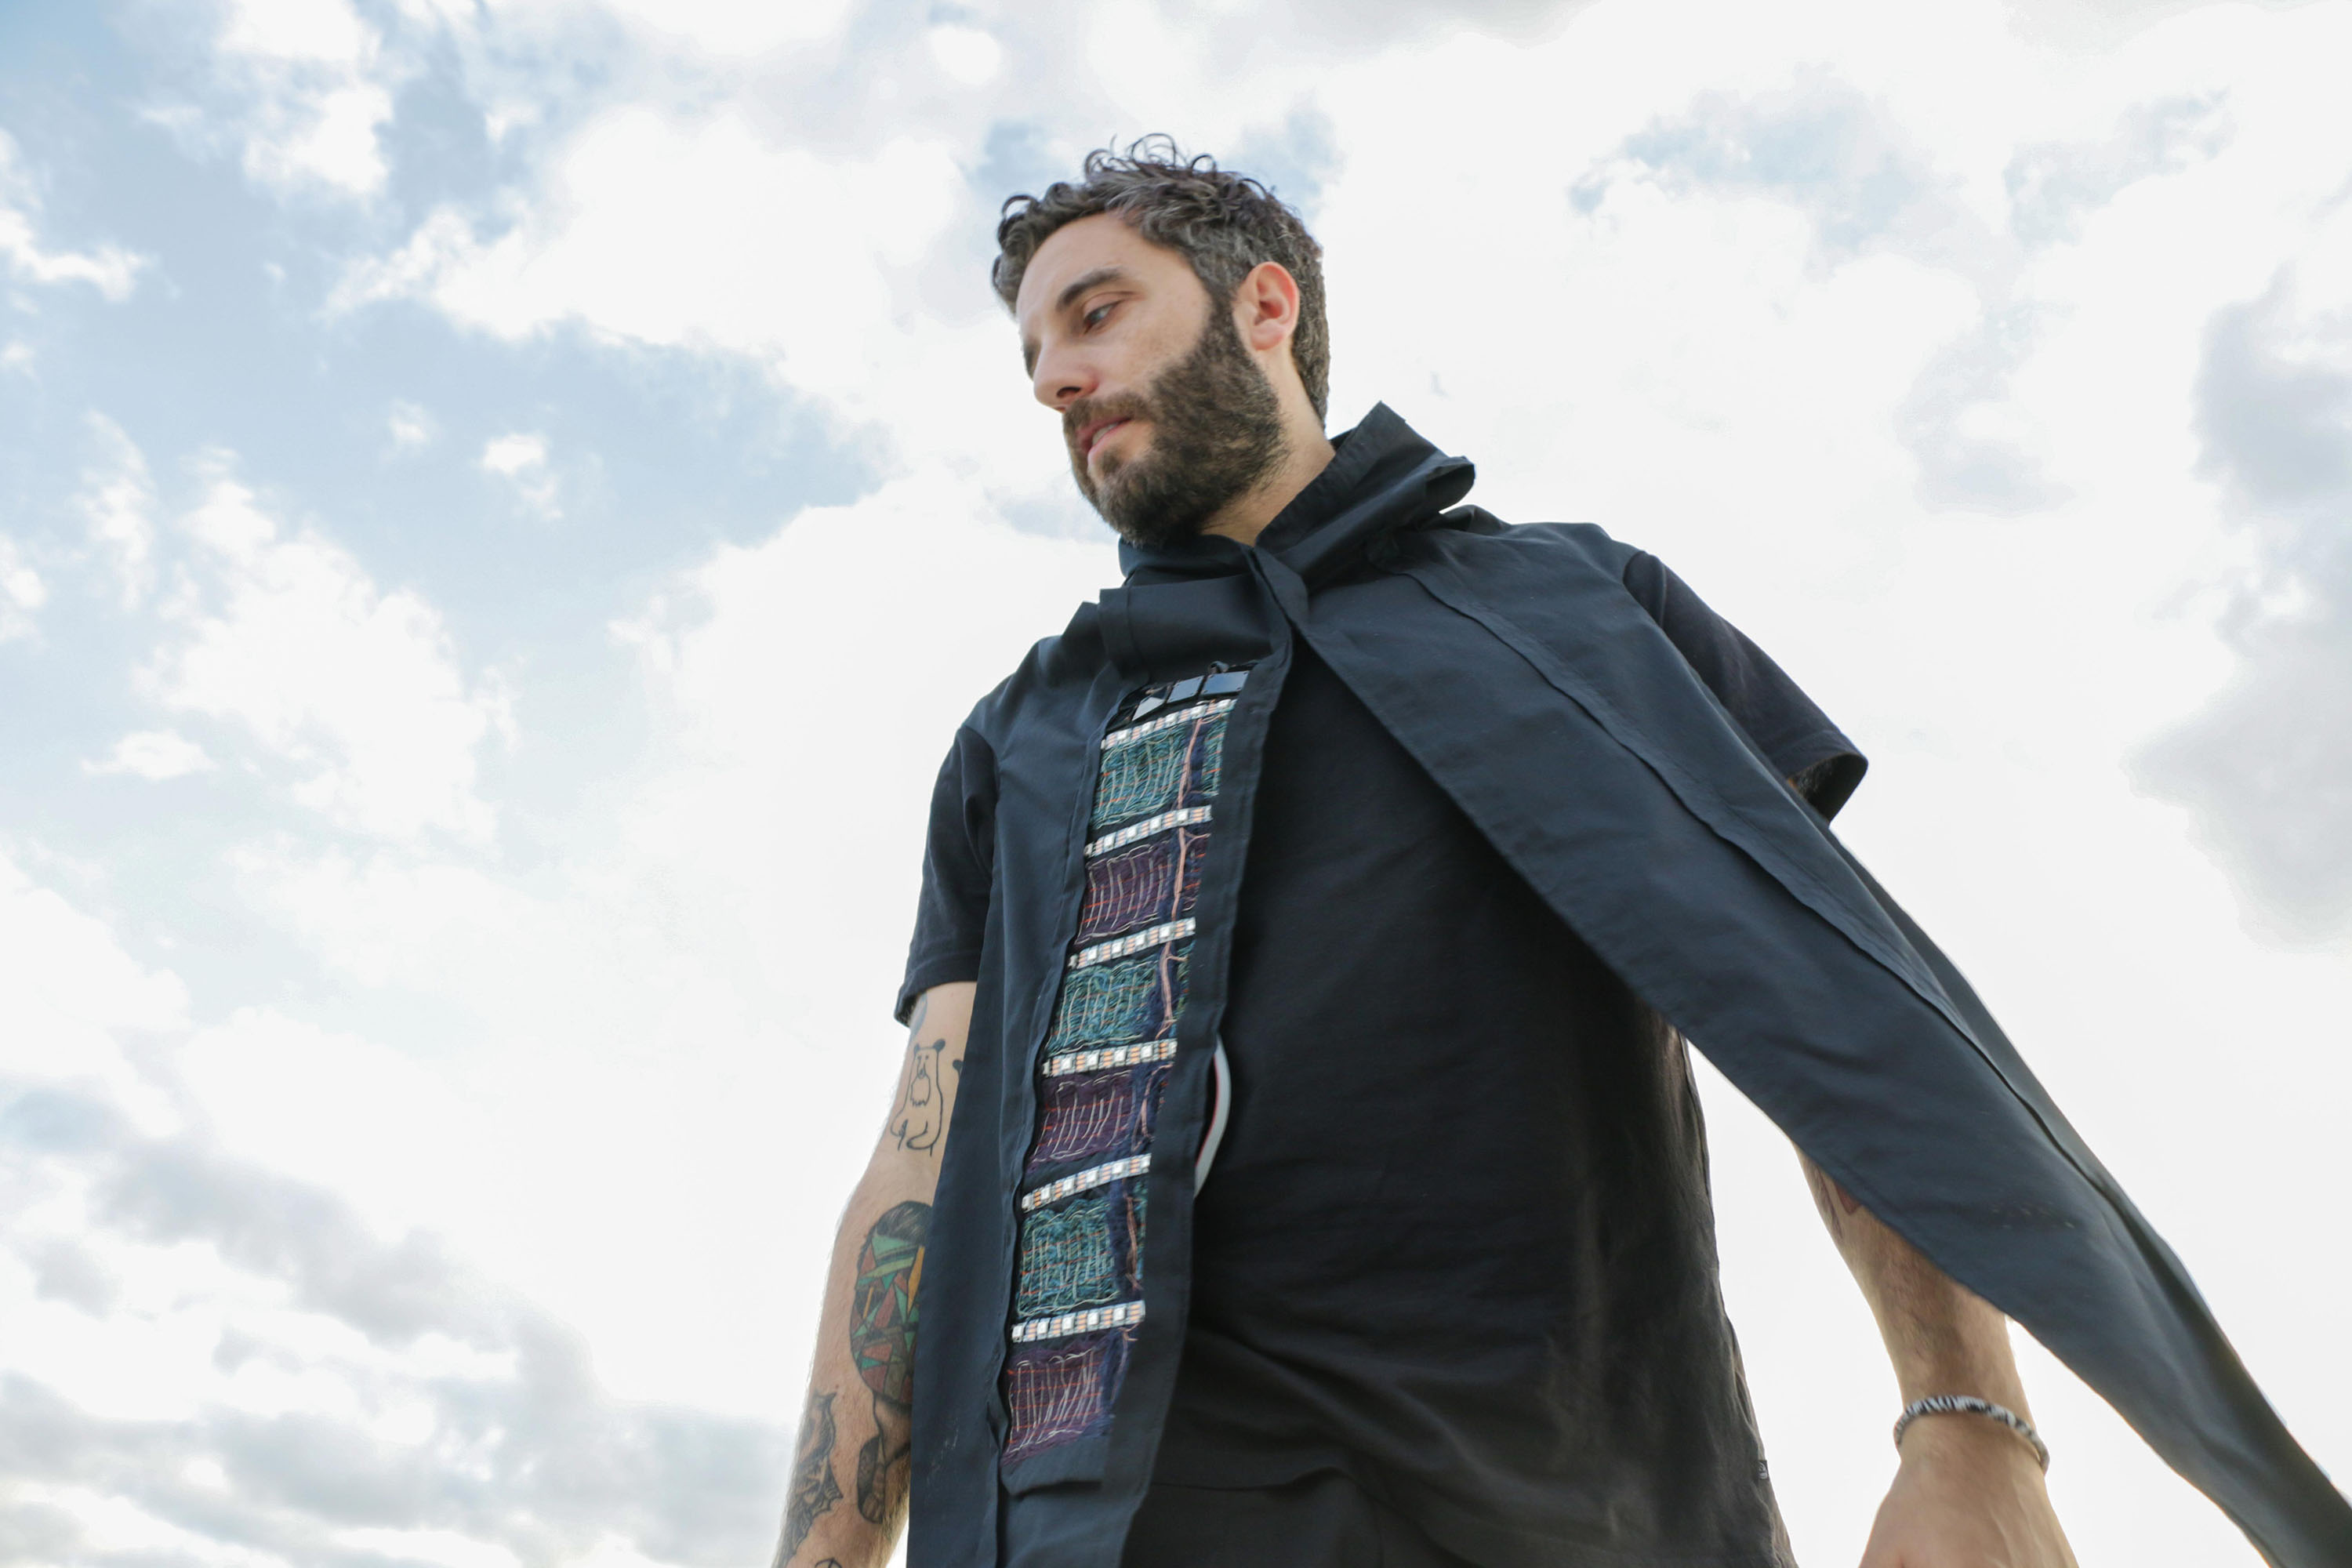 Italian artist Rhó performs with a wearable tech musical garment called "The Hood", developed at Georgia Tech.